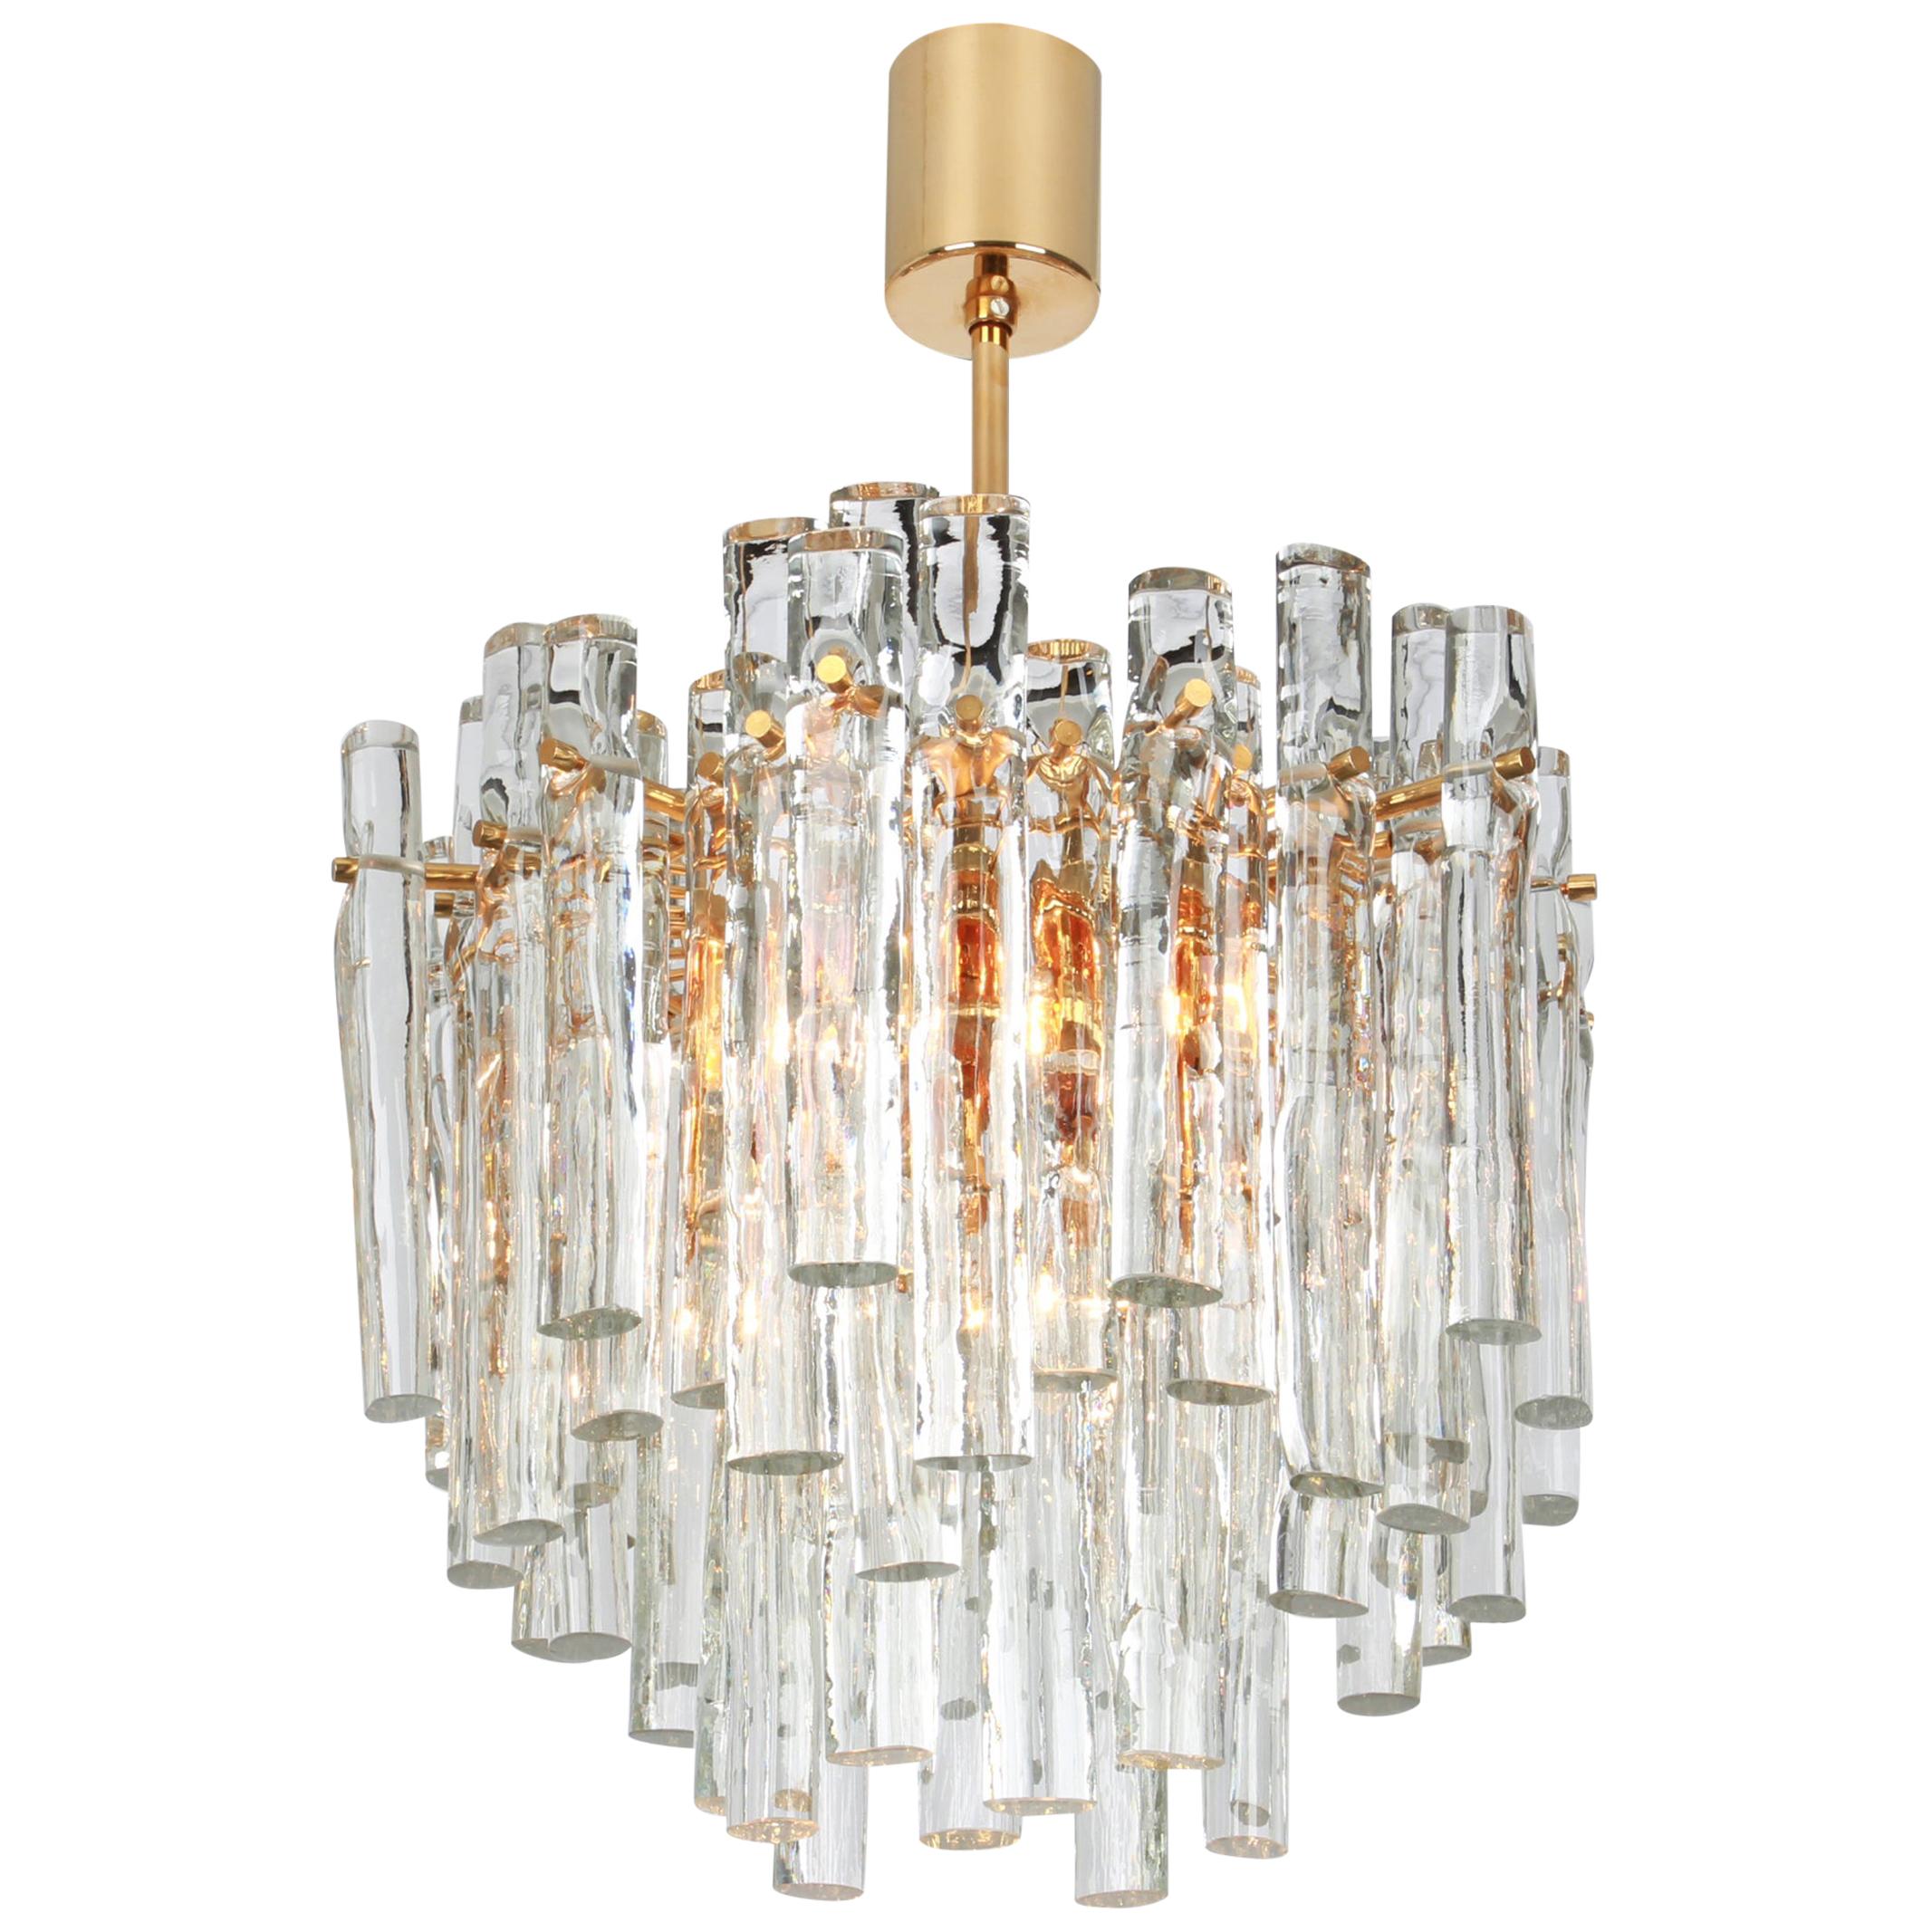 A stunning chandelier by Kinkeldey, Germany, manufactured in circa 1970-1979. A handmade and high quality piece. The ceiling fixture and the frame are made of brass and a ring with lots of facetted crystal glass elements.
Modell: Cascade
Sockets: